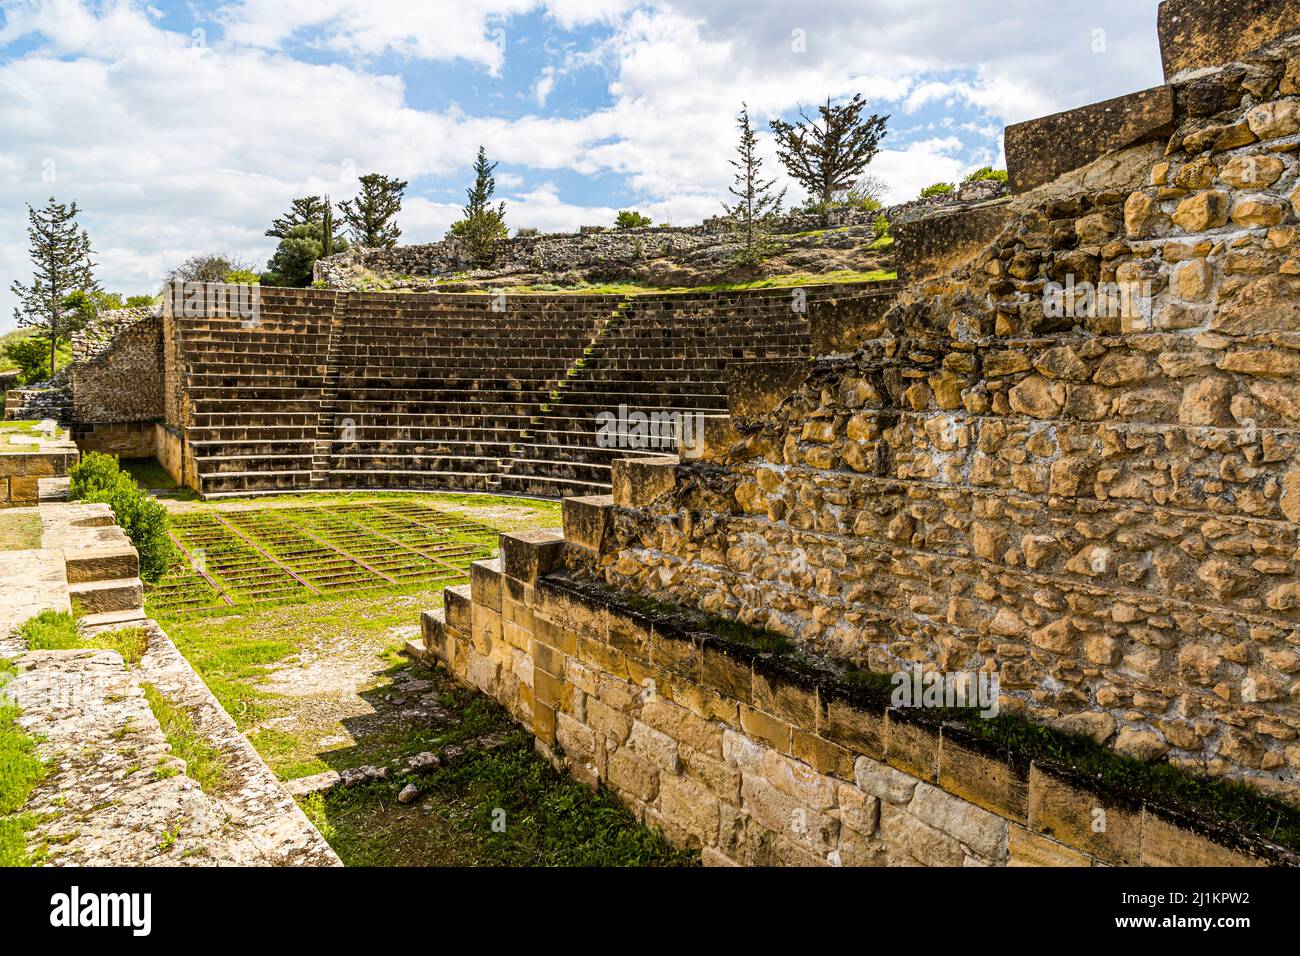 The theater of Soloi was built in the second half of the 2nd century and is located east below the palace terrace. Gemikonağı, Turkish Republic of Northern Cyprus (TRNC) Stock Photo